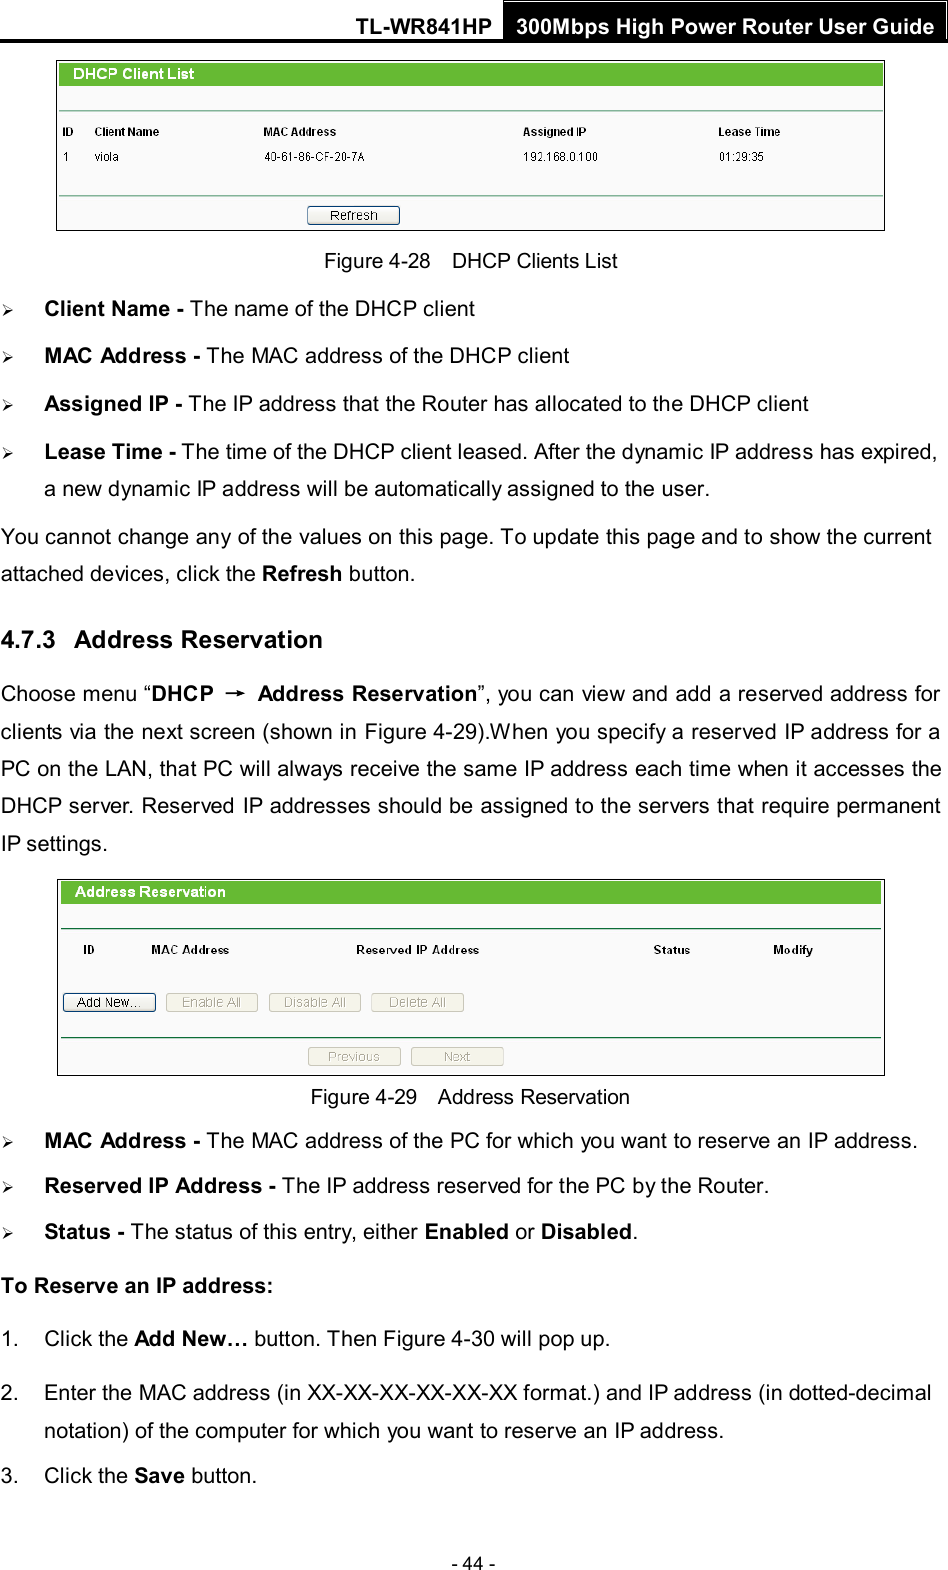 TL-WR841HP 300Mbps High Power Router User Guide  - 44 -  Figure 4-28  DHCP Clients List  Client Name - The name of the DHCP client    MAC Address - The MAC address of the DHCP client    Assigned IP - The IP address that the Router has allocated to the DHCP client  Lease Time - The time of the DHCP client leased. After the dynamic IP address has expired, a new dynamic IP address will be automatically assigned to the user.     You cannot change any of the values on this page. To update this page and to show the current attached devices, click the Refresh button. 4.7.3 Address Reservation Choose menu “DHCP → Address Reservation”, you can view and add a reserved address for clients via the next screen (shown in Figure 4-29).When you specify a reserved IP address for a PC on the LAN, that PC will always receive the same IP address each time when it accesses the DHCP server. Reserved IP addresses should be assigned to the servers that require permanent IP settings.    Figure 4-29  Address Reservation  MAC Address - The MAC address of the PC for which you want to reserve an IP address.  Reserved IP Address - The IP address reserved for the PC by the Router.  Status - The status of this entry, either Enabled or Disabled. To Reserve an IP address:   1. Click the Add New… button. Then Figure 4-30 will pop up. 2. Enter the MAC address (in XX-XX-XX-XX-XX-XX format.) and IP address (in dotted-decimal notation) of the computer for which you want to reserve an IP address.   3. Click the Save button.   